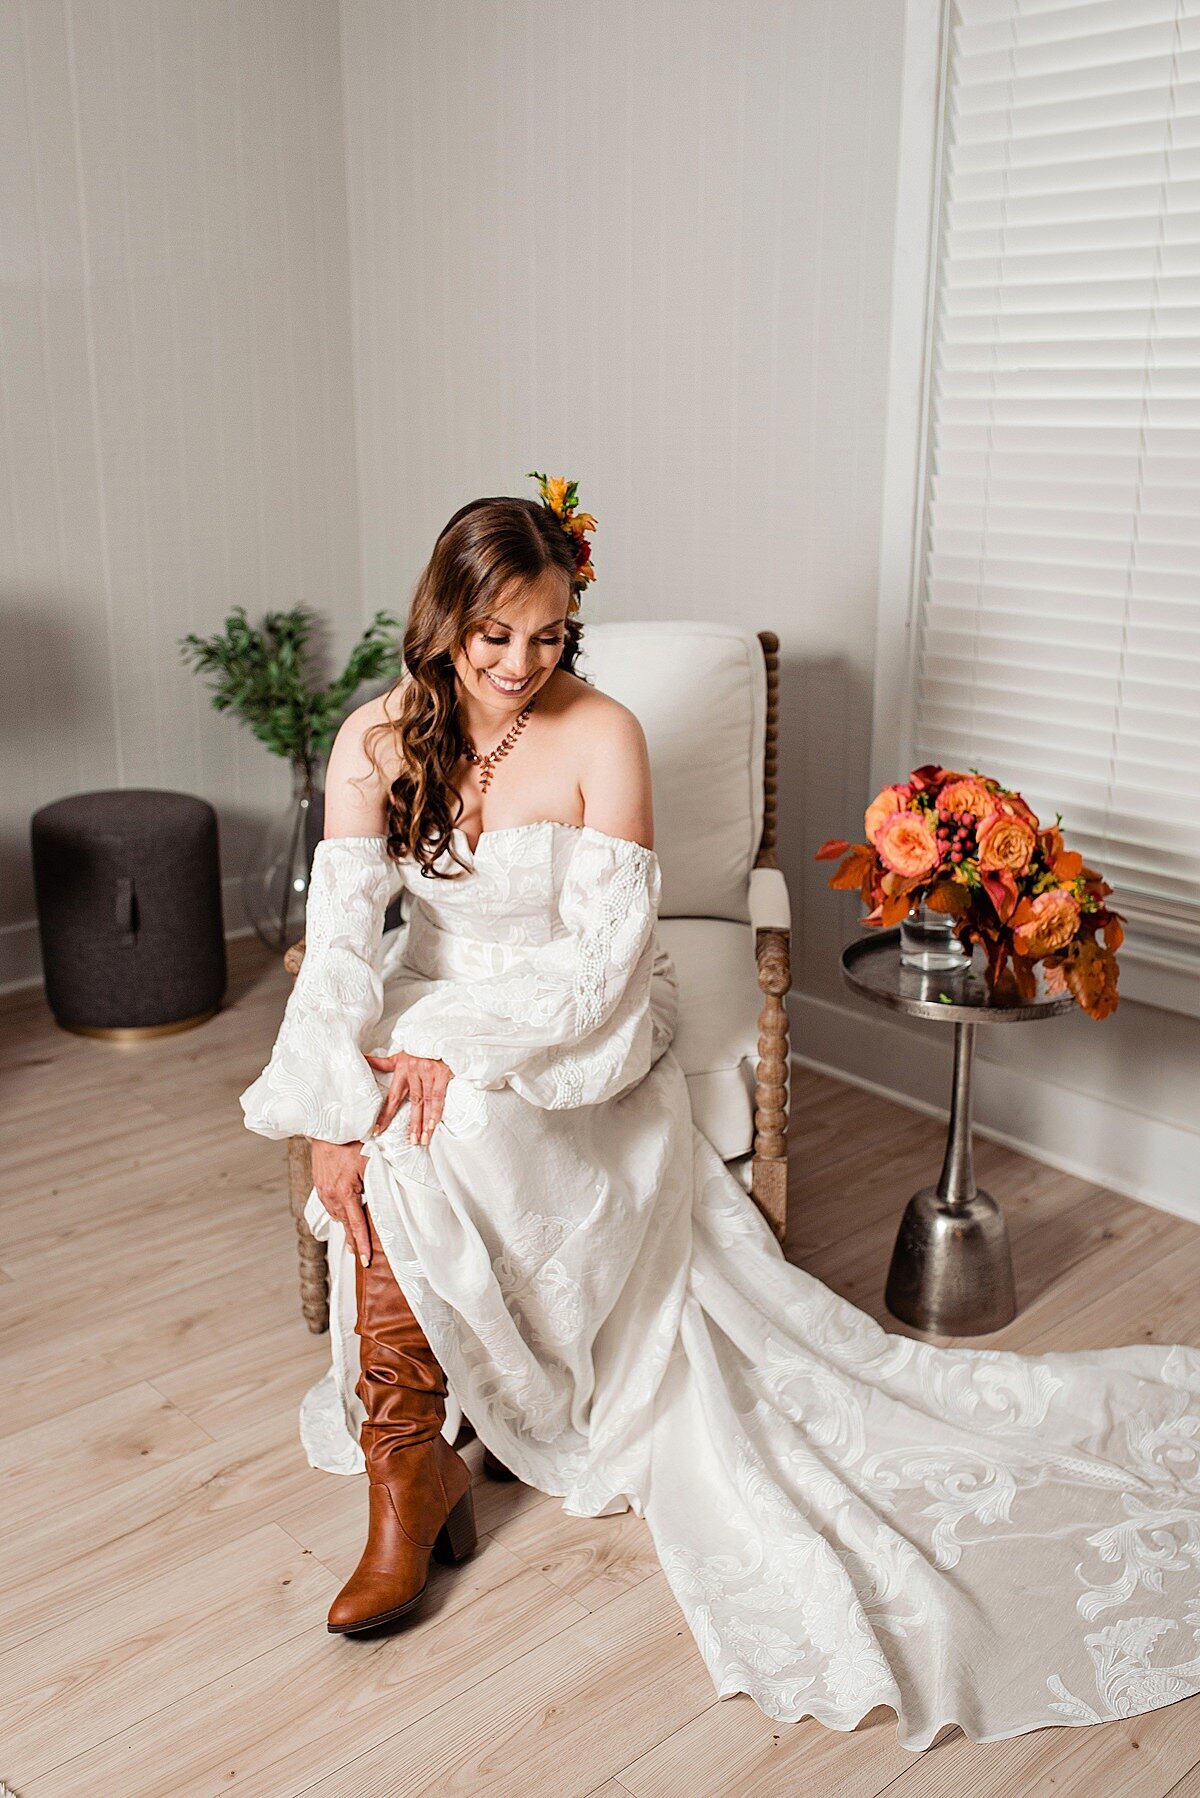 A bpho bride wearing a strapless lace wedding dress with  detached sleeves puts on knee high brown boots for her Nashville wedding. Sitting on a silver table beside her is her autumnal bridal bouquet of orange gerbera daisies, orange roses, burgundy roses, yellow roses burgundy mums, and autumn leaves.